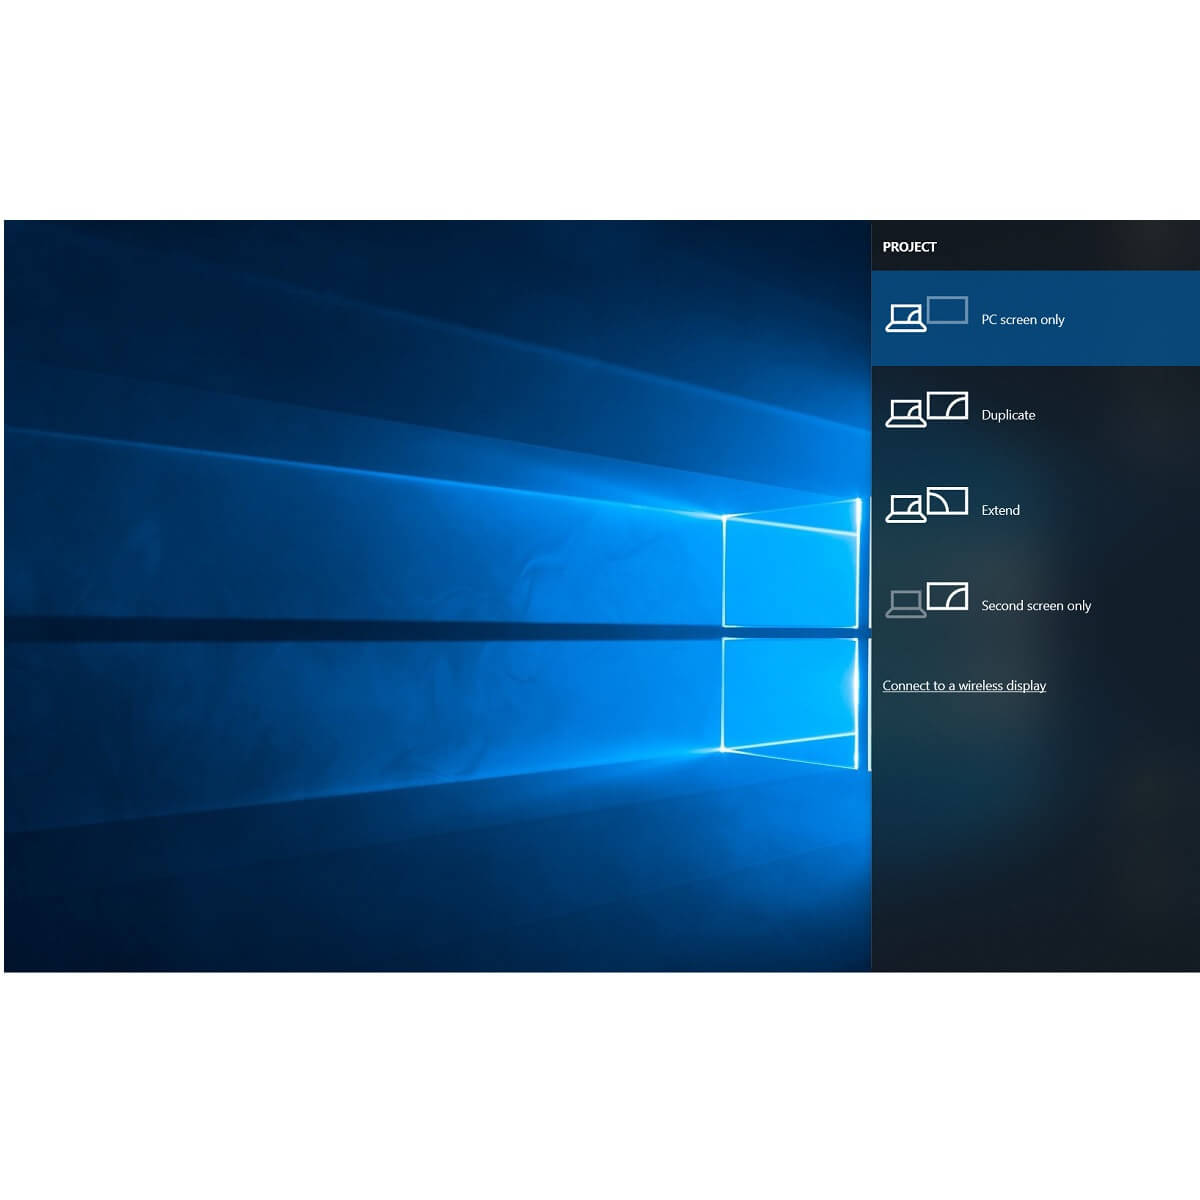 free miracast download for windows 10